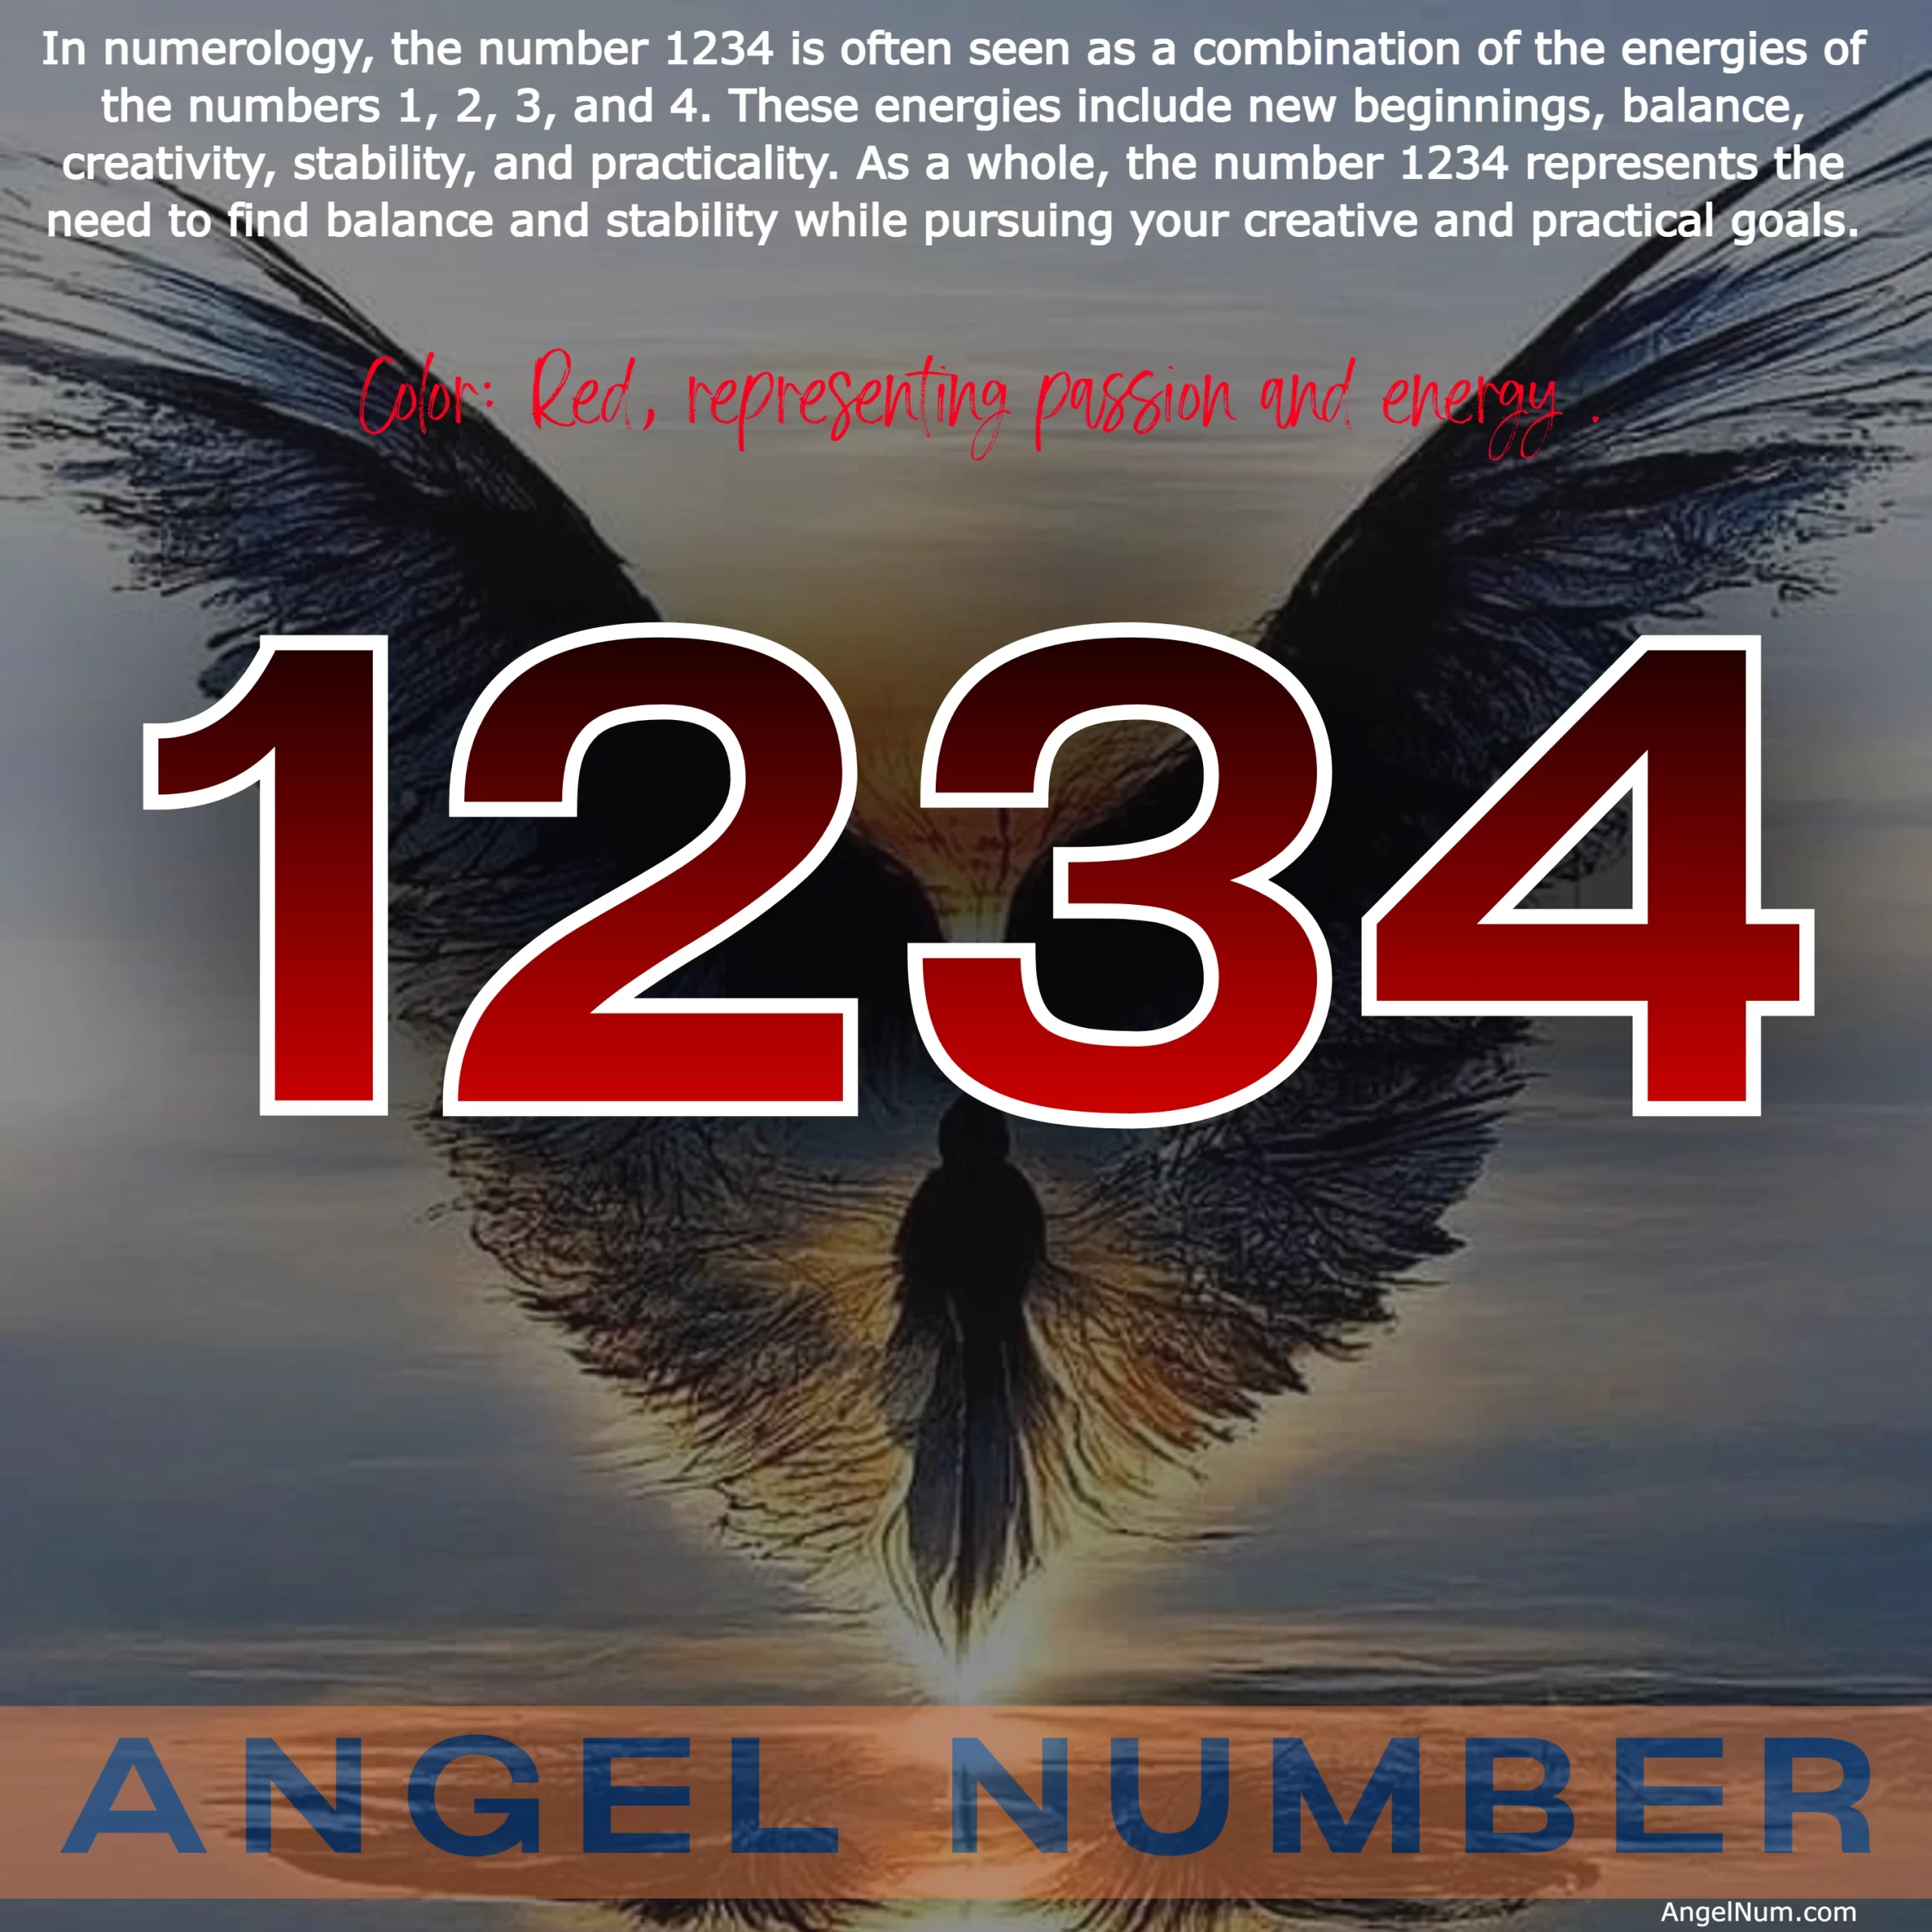 Angel Number 1234: The Meaning and Significance